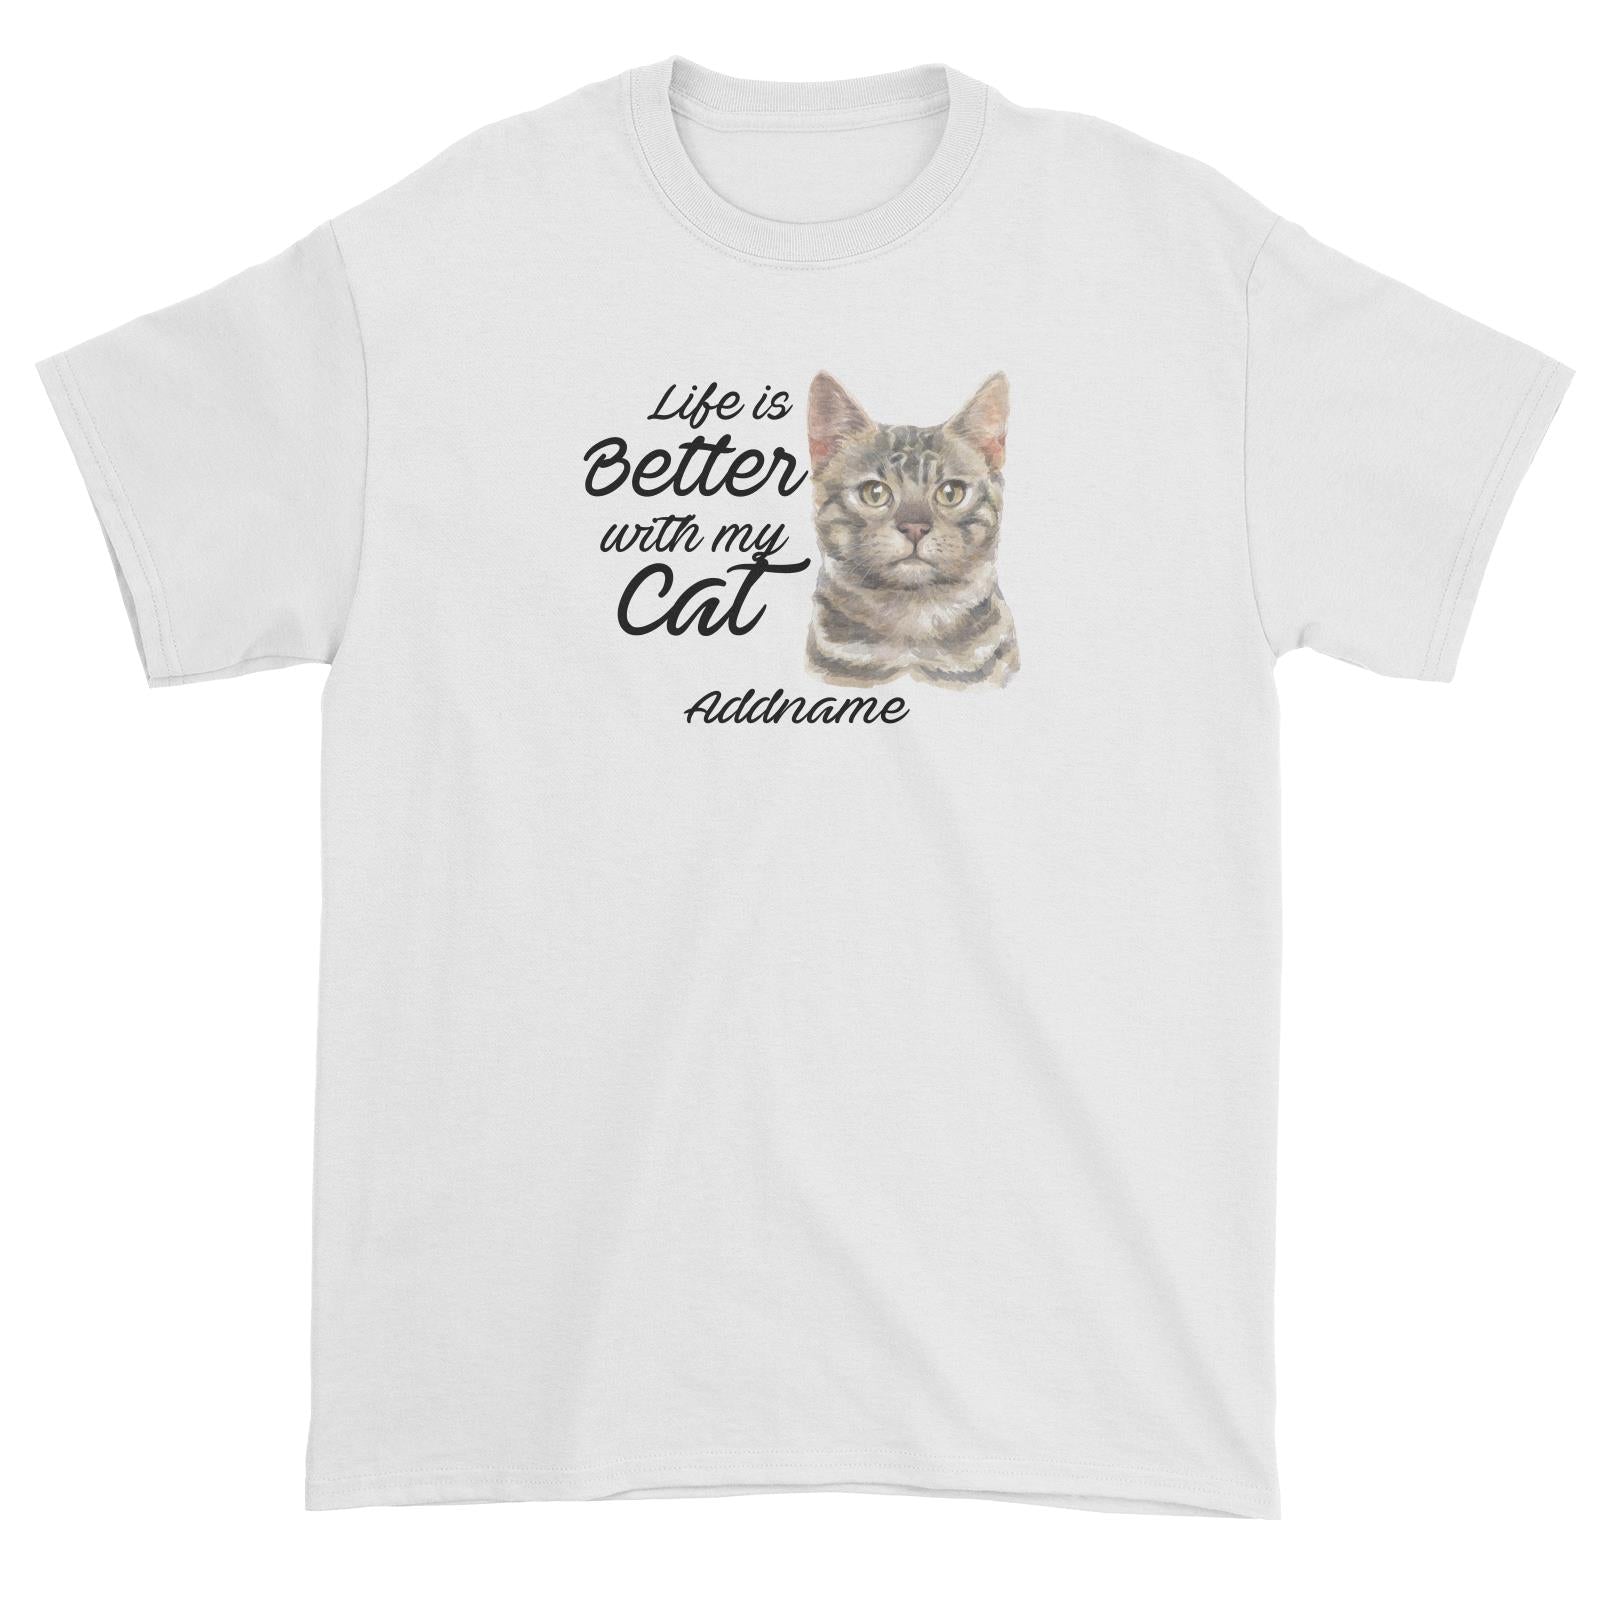 Watercolor Life is Better With My Cat Bengal Grey Addname Unisex T-Shirt